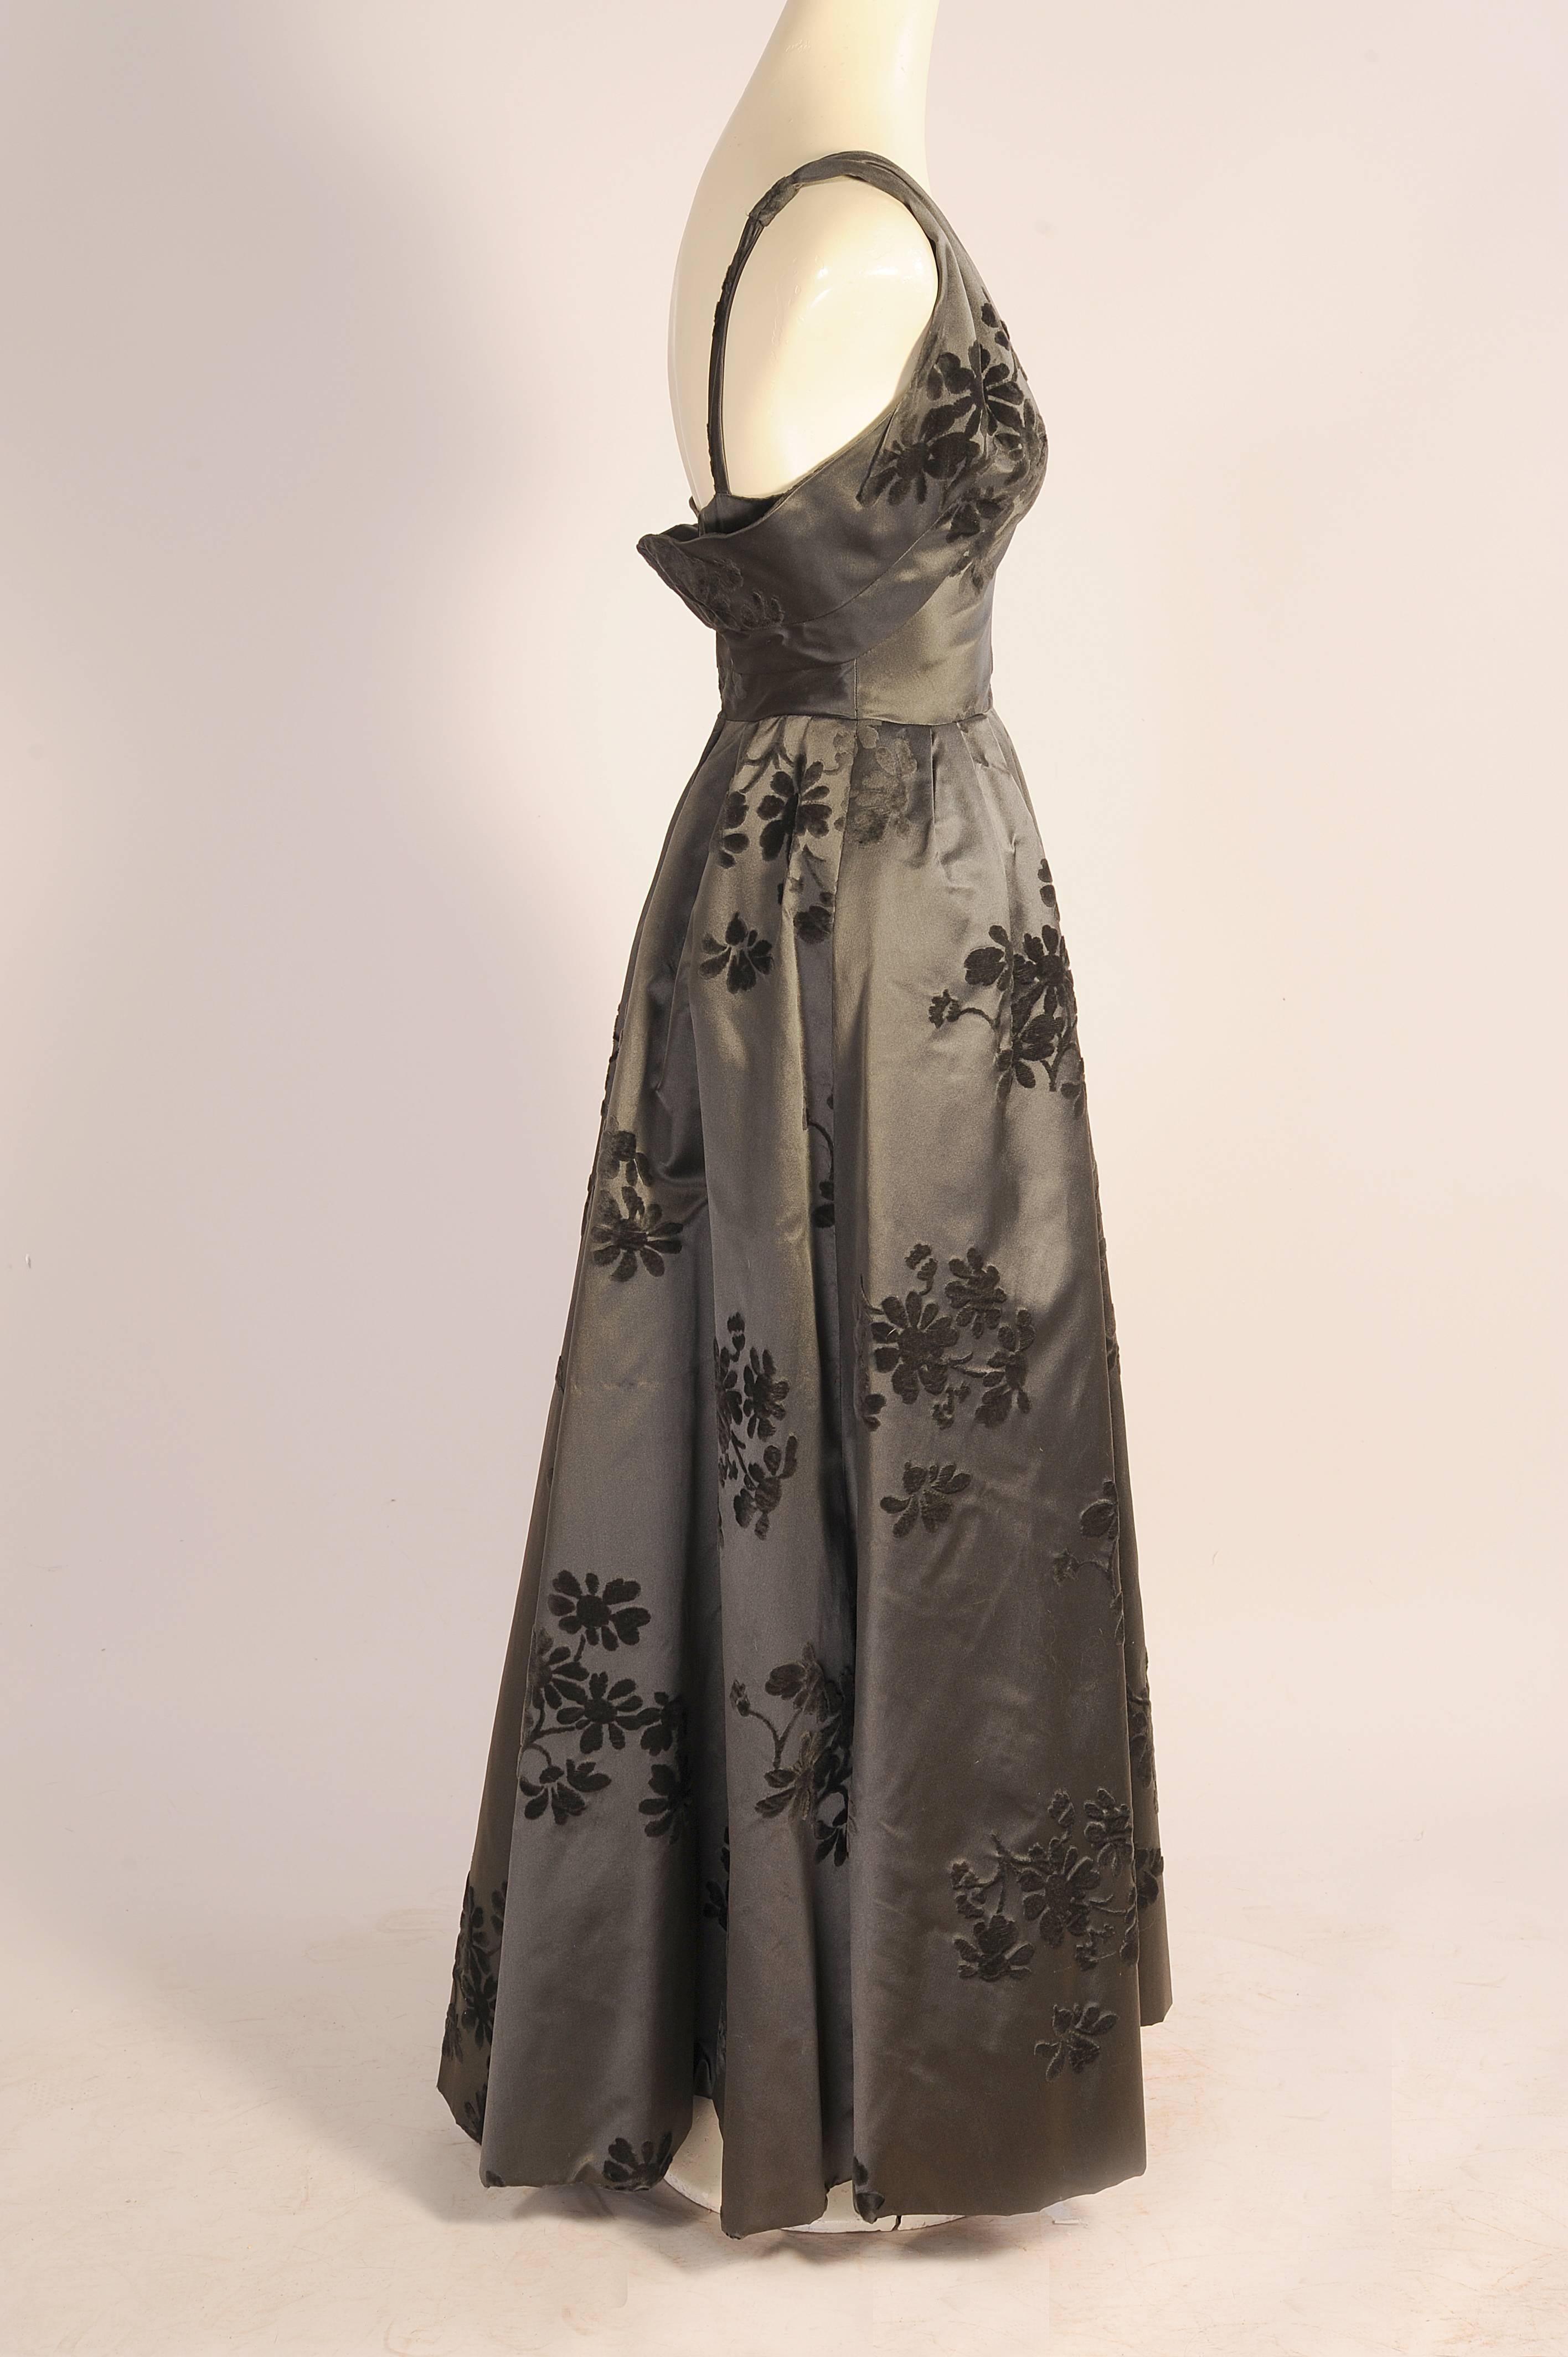 This elegant evening gown is the perfect jewelry dress, so classic it is just waiting for your most glamorous gems.
It is made from charcoal grey silk satin with black velvet floral motifs throughout. The bodice is fitted with a V neckline and